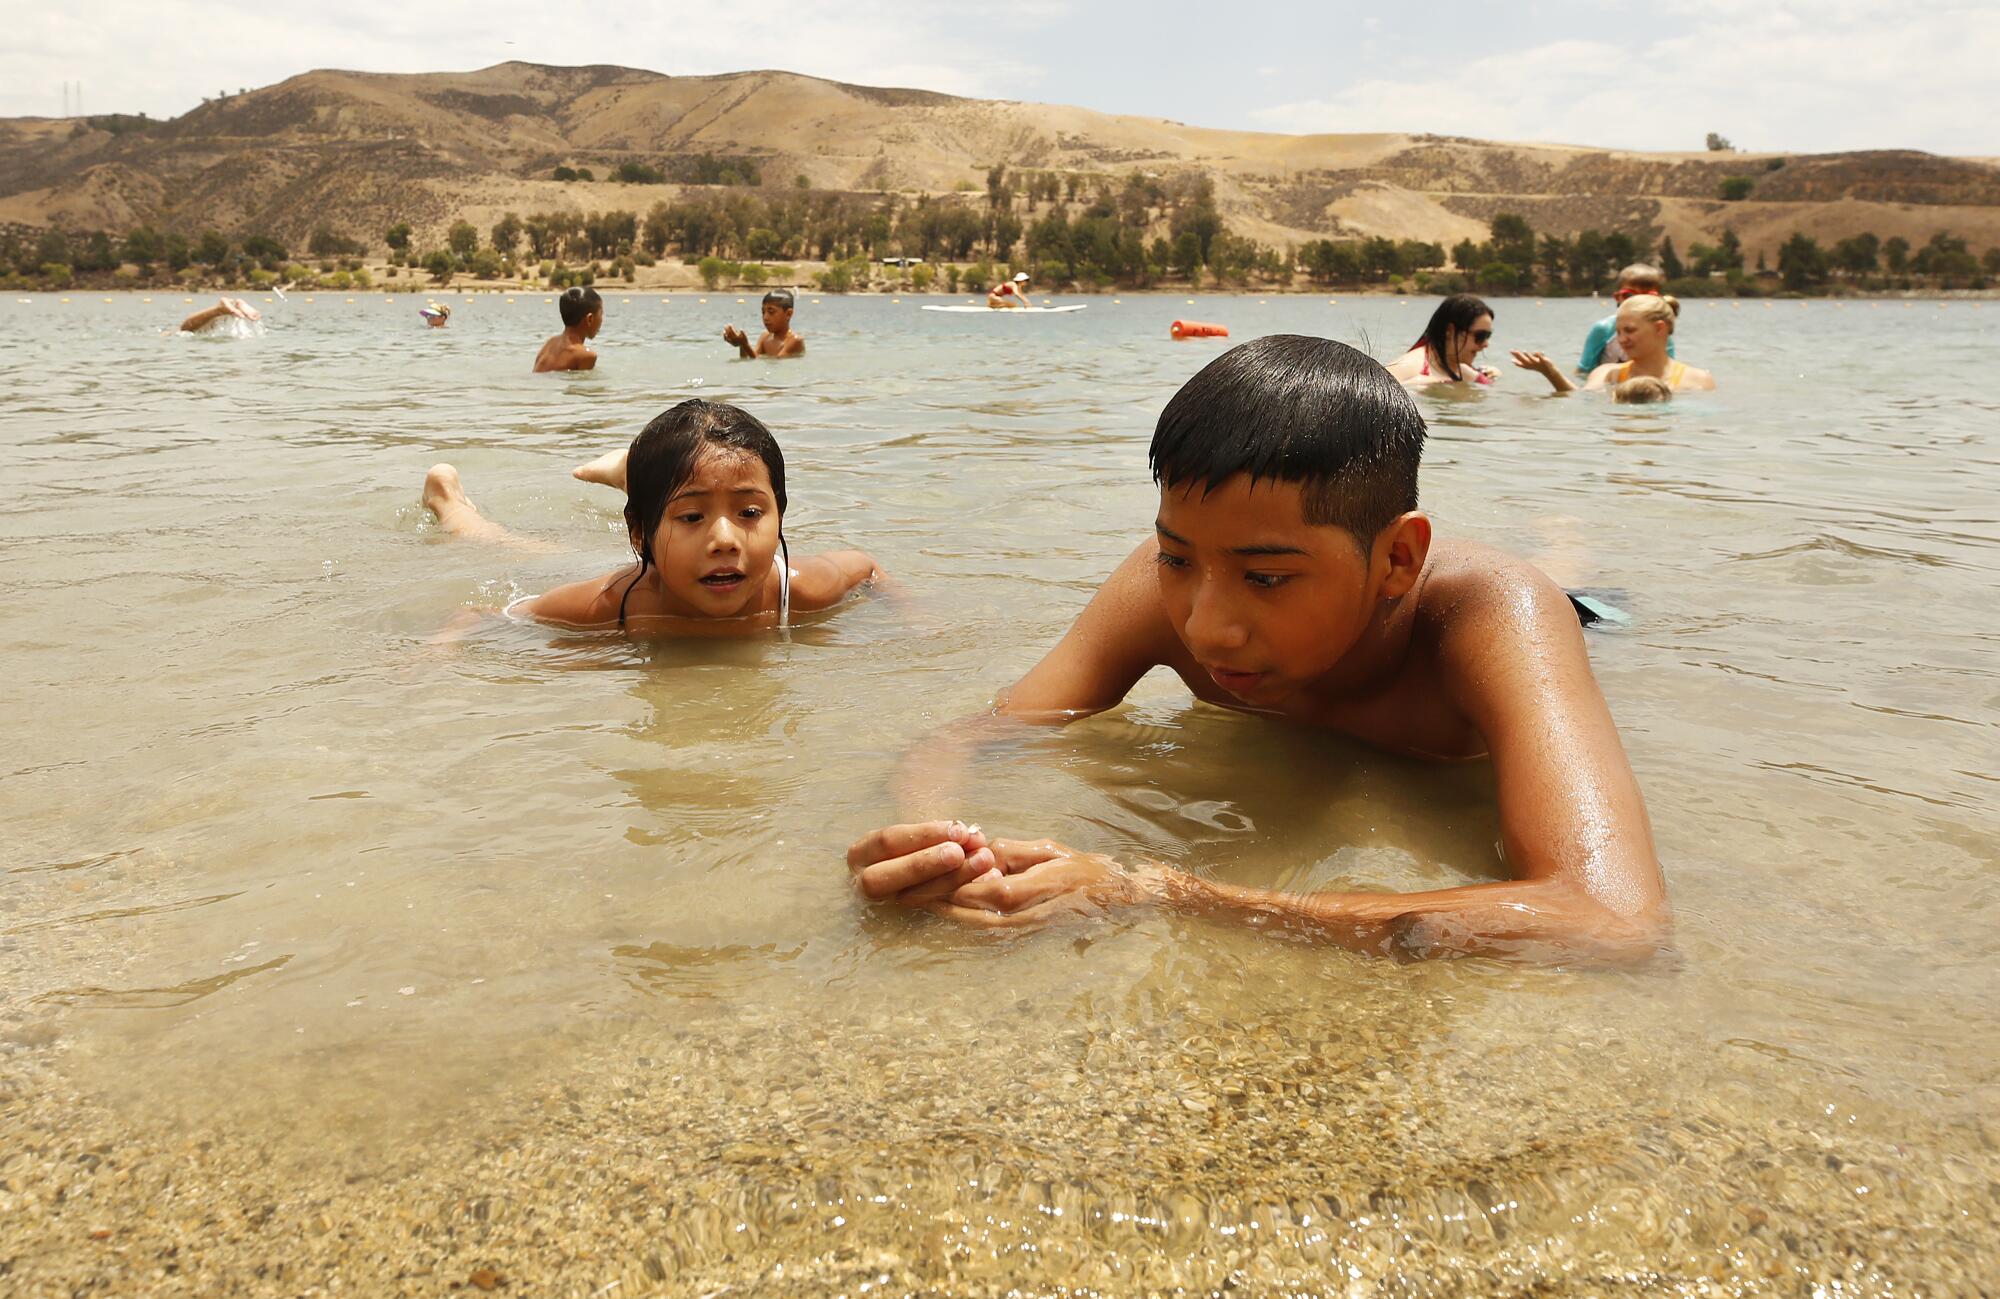 Samuel Garcia, 12, collects shells in the sand for his sister Paola Garcia, 4, at Castaic Lake Lagoon